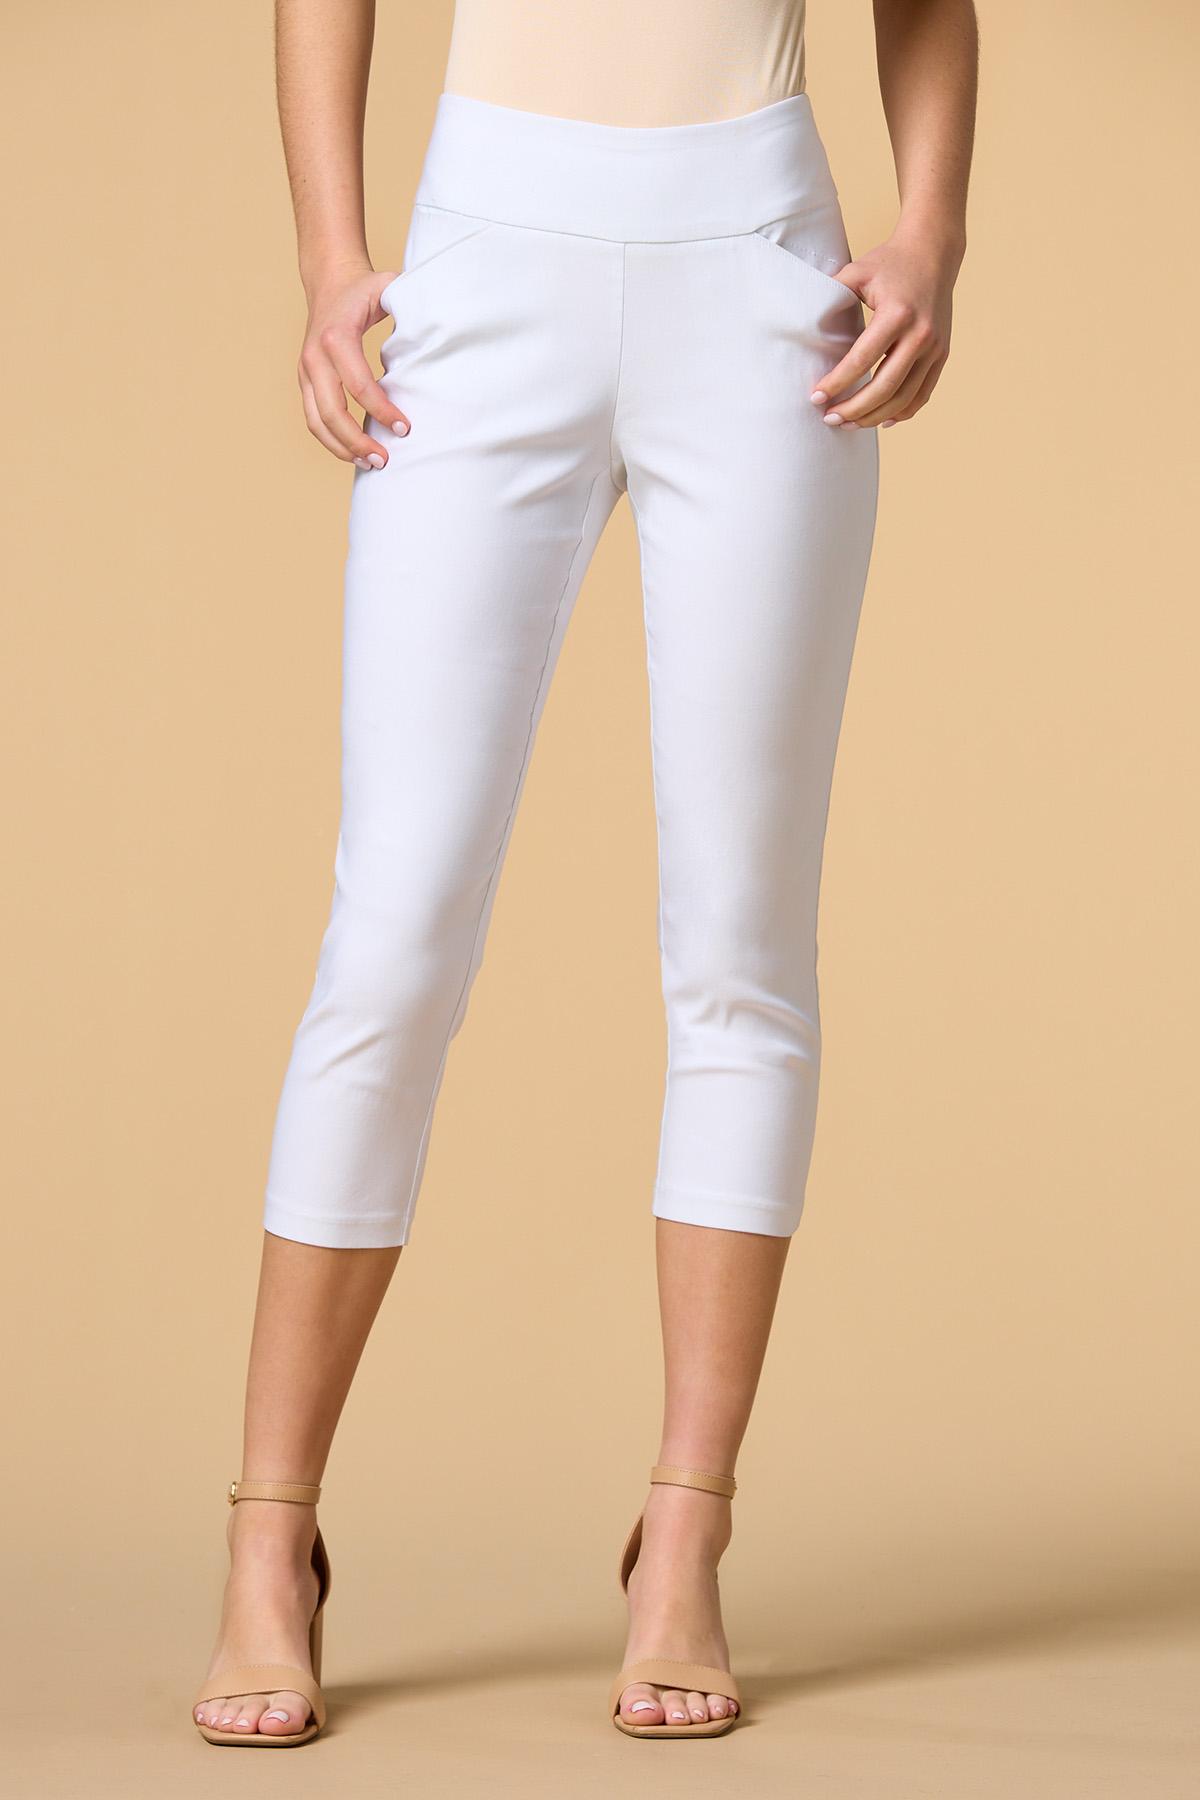 Hue Leggings Womens Large 14 16 White Joggers Stretch Cropped